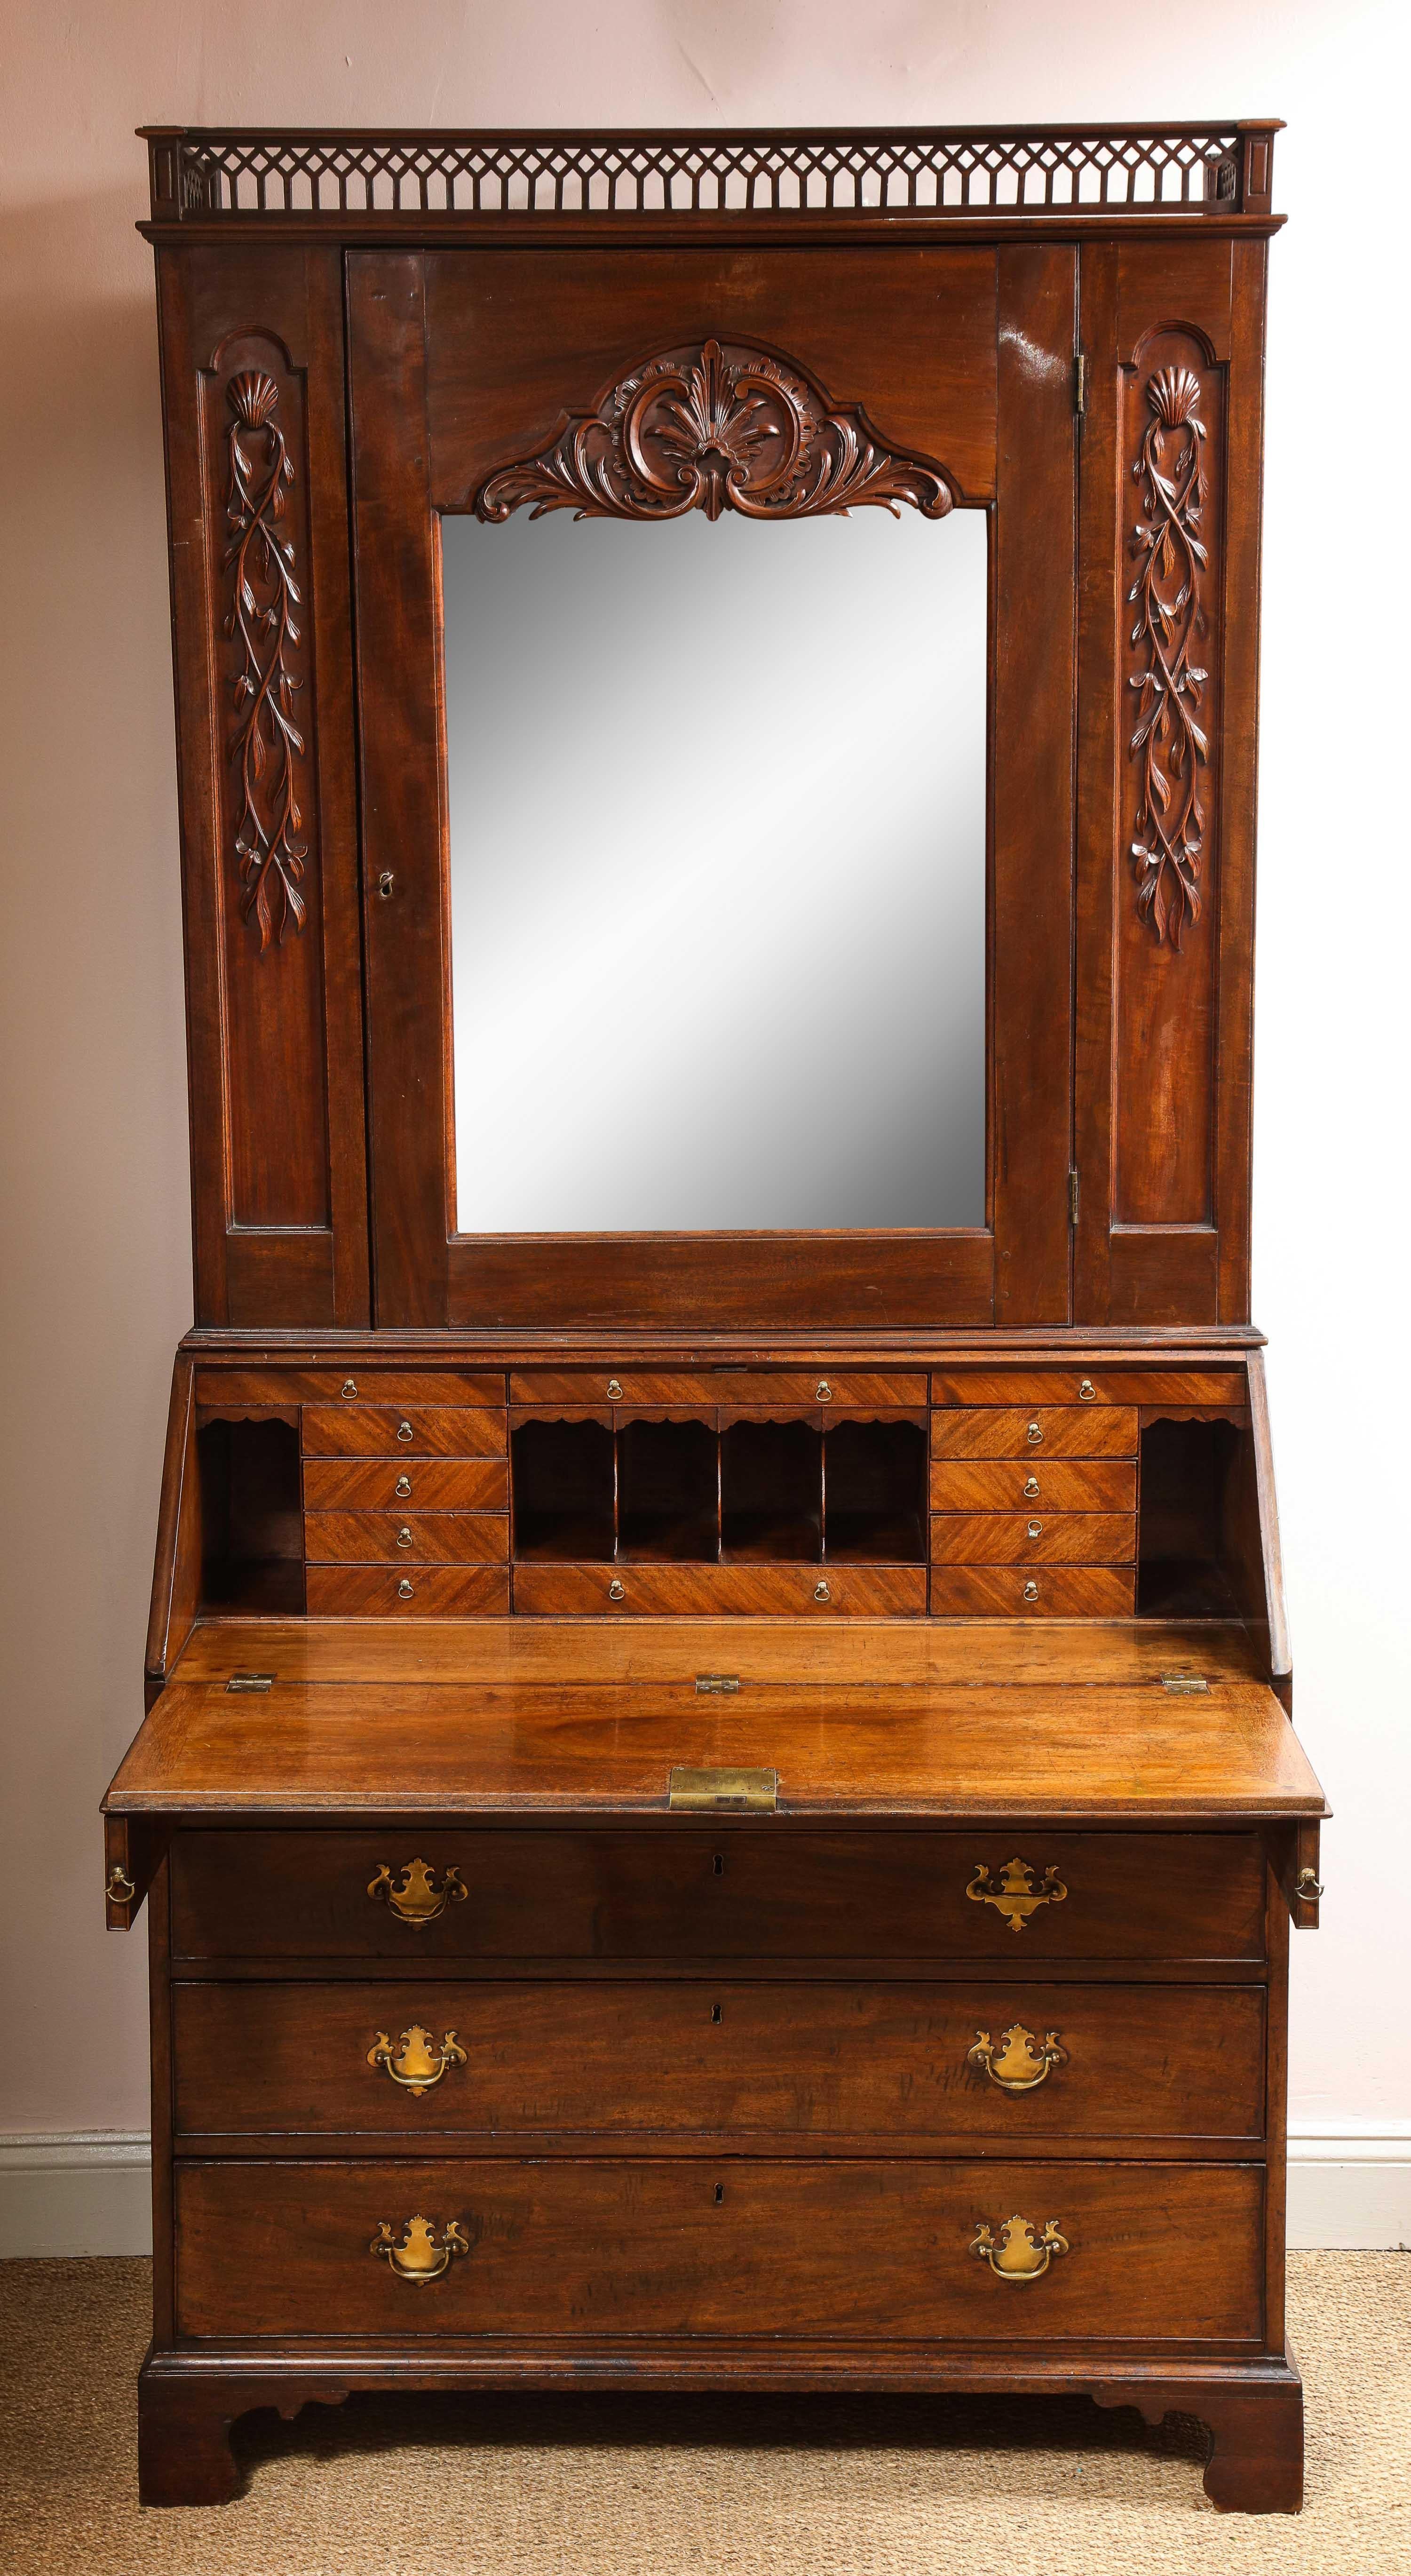 Fine and unusual 18th century Irish mahogany bureau bookcase, the pierced gallery top with Gothic details, the pilasters and door with rich and crisply carved shell and foliate design, the door with original beveled mercury glass mirror, over fitted